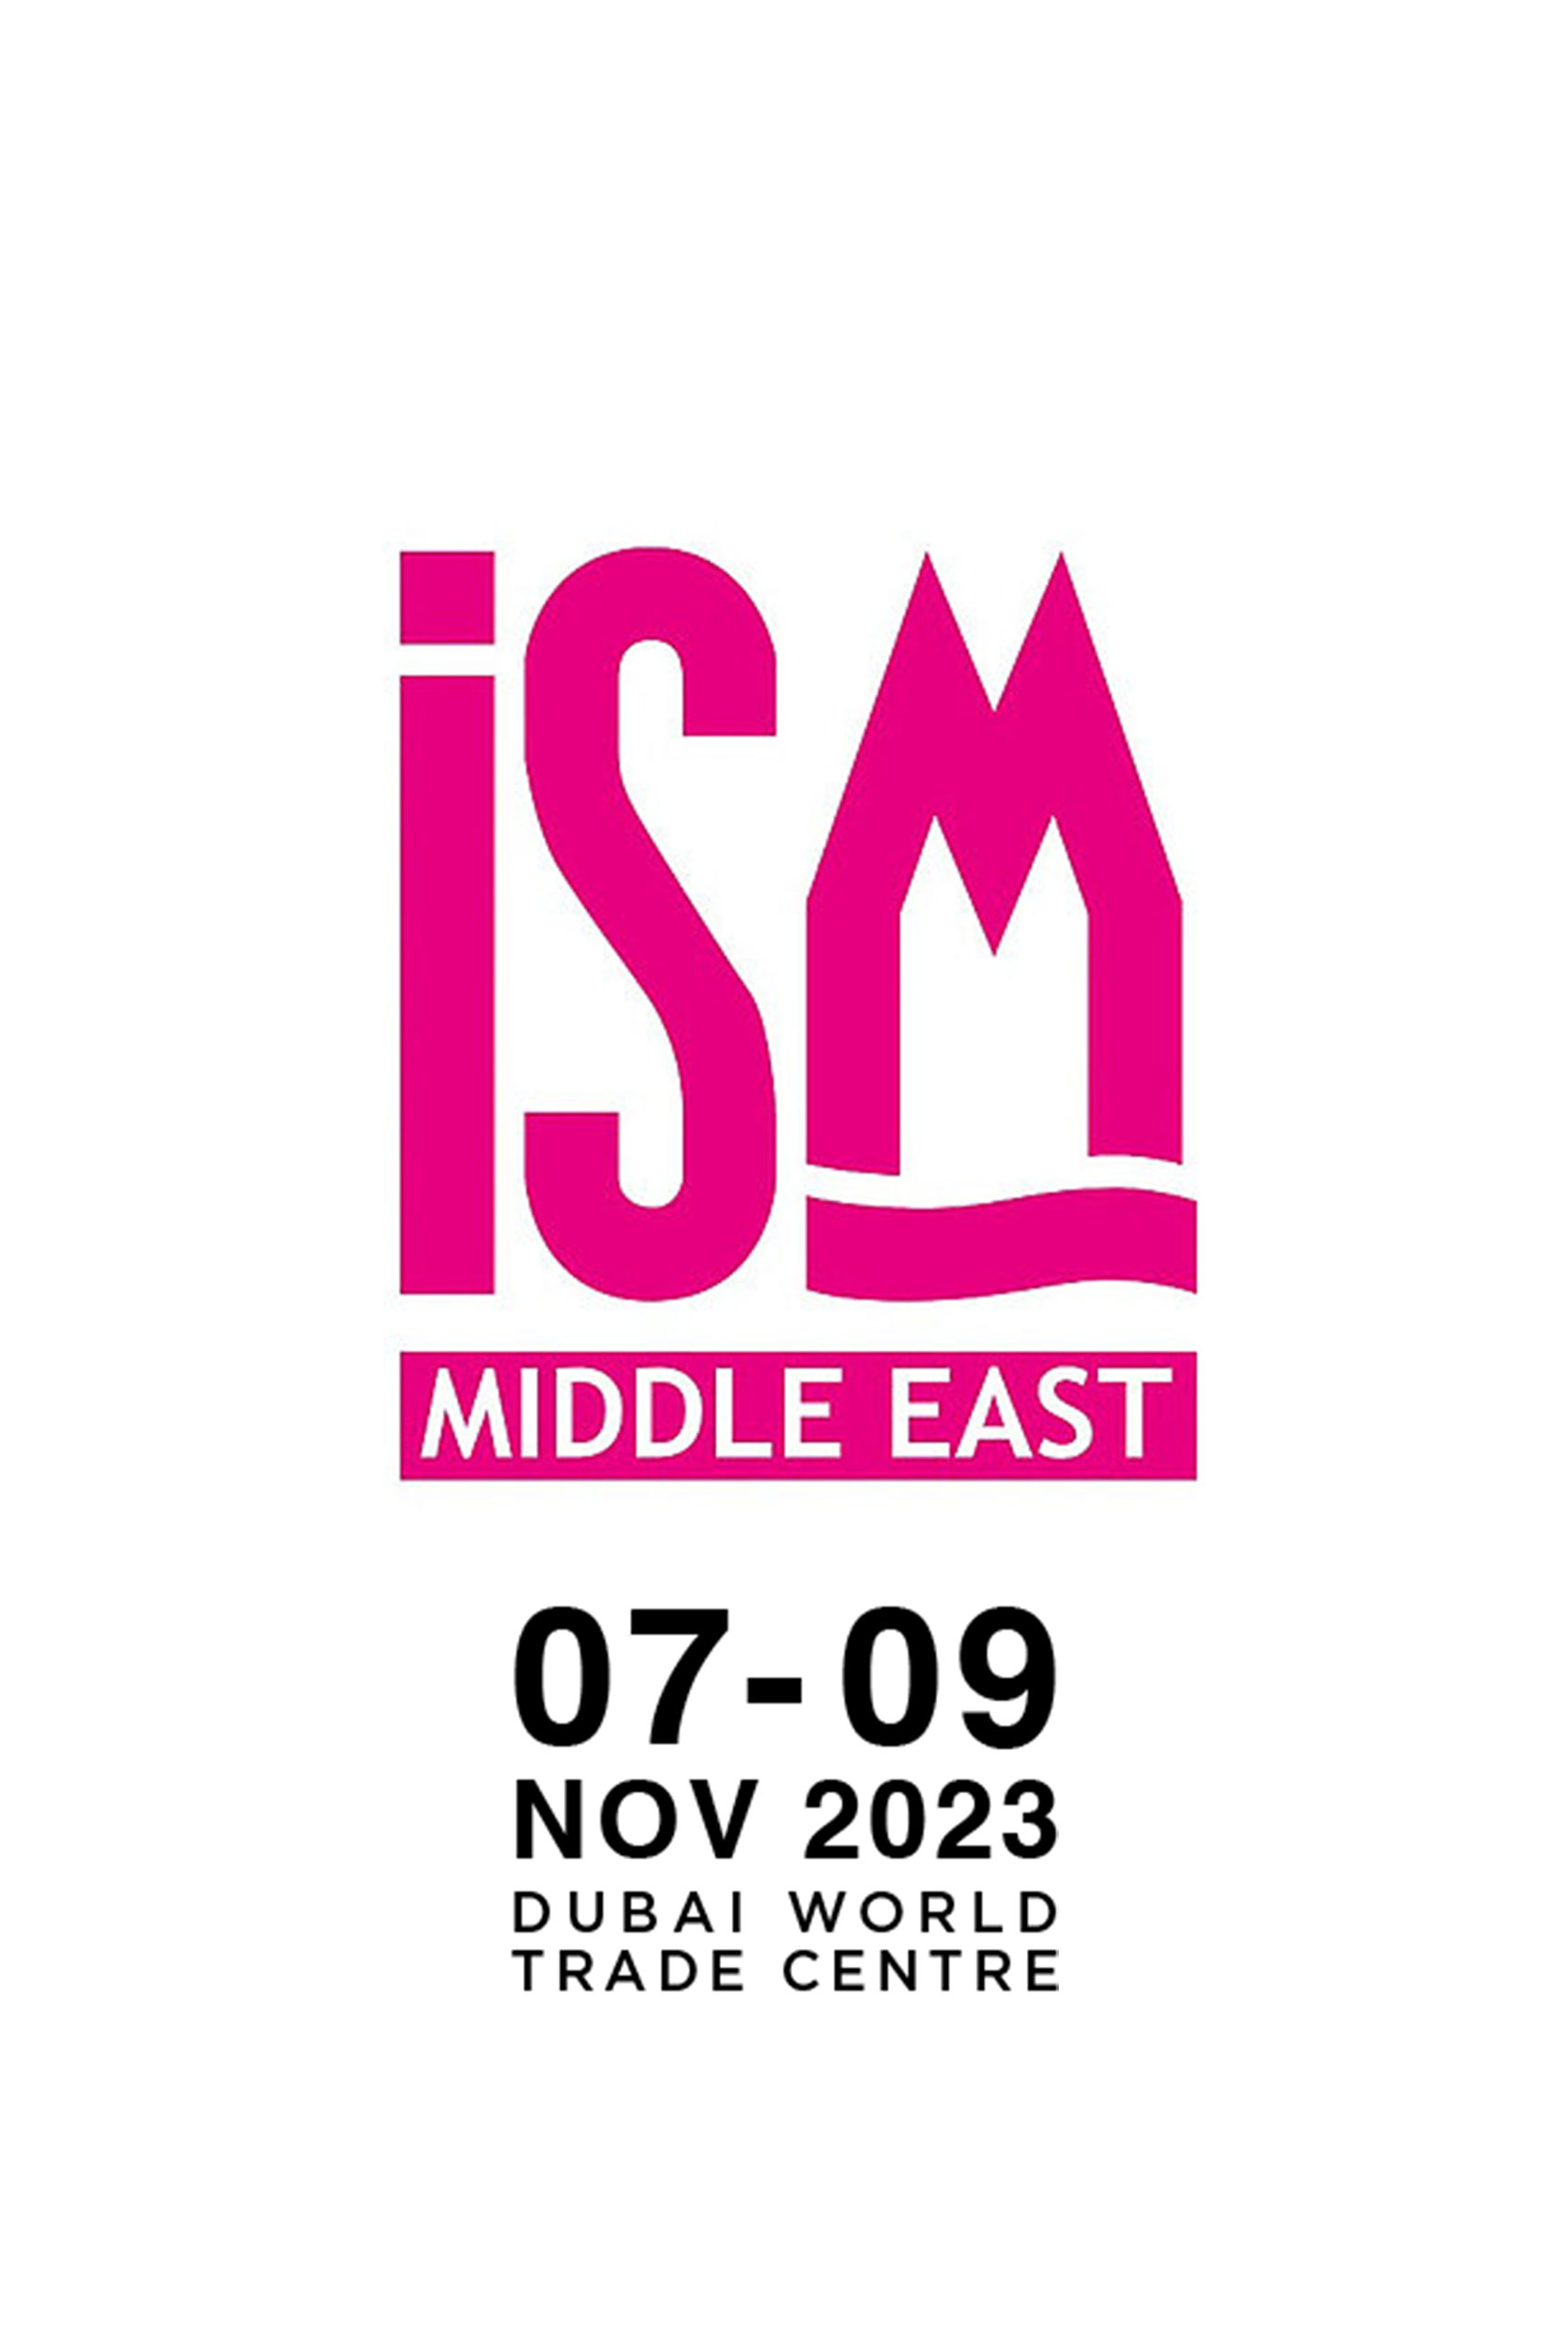 Second Presence Of Sehramiz Brand At ISM MIDDLE EAST EXHIBITION 2023